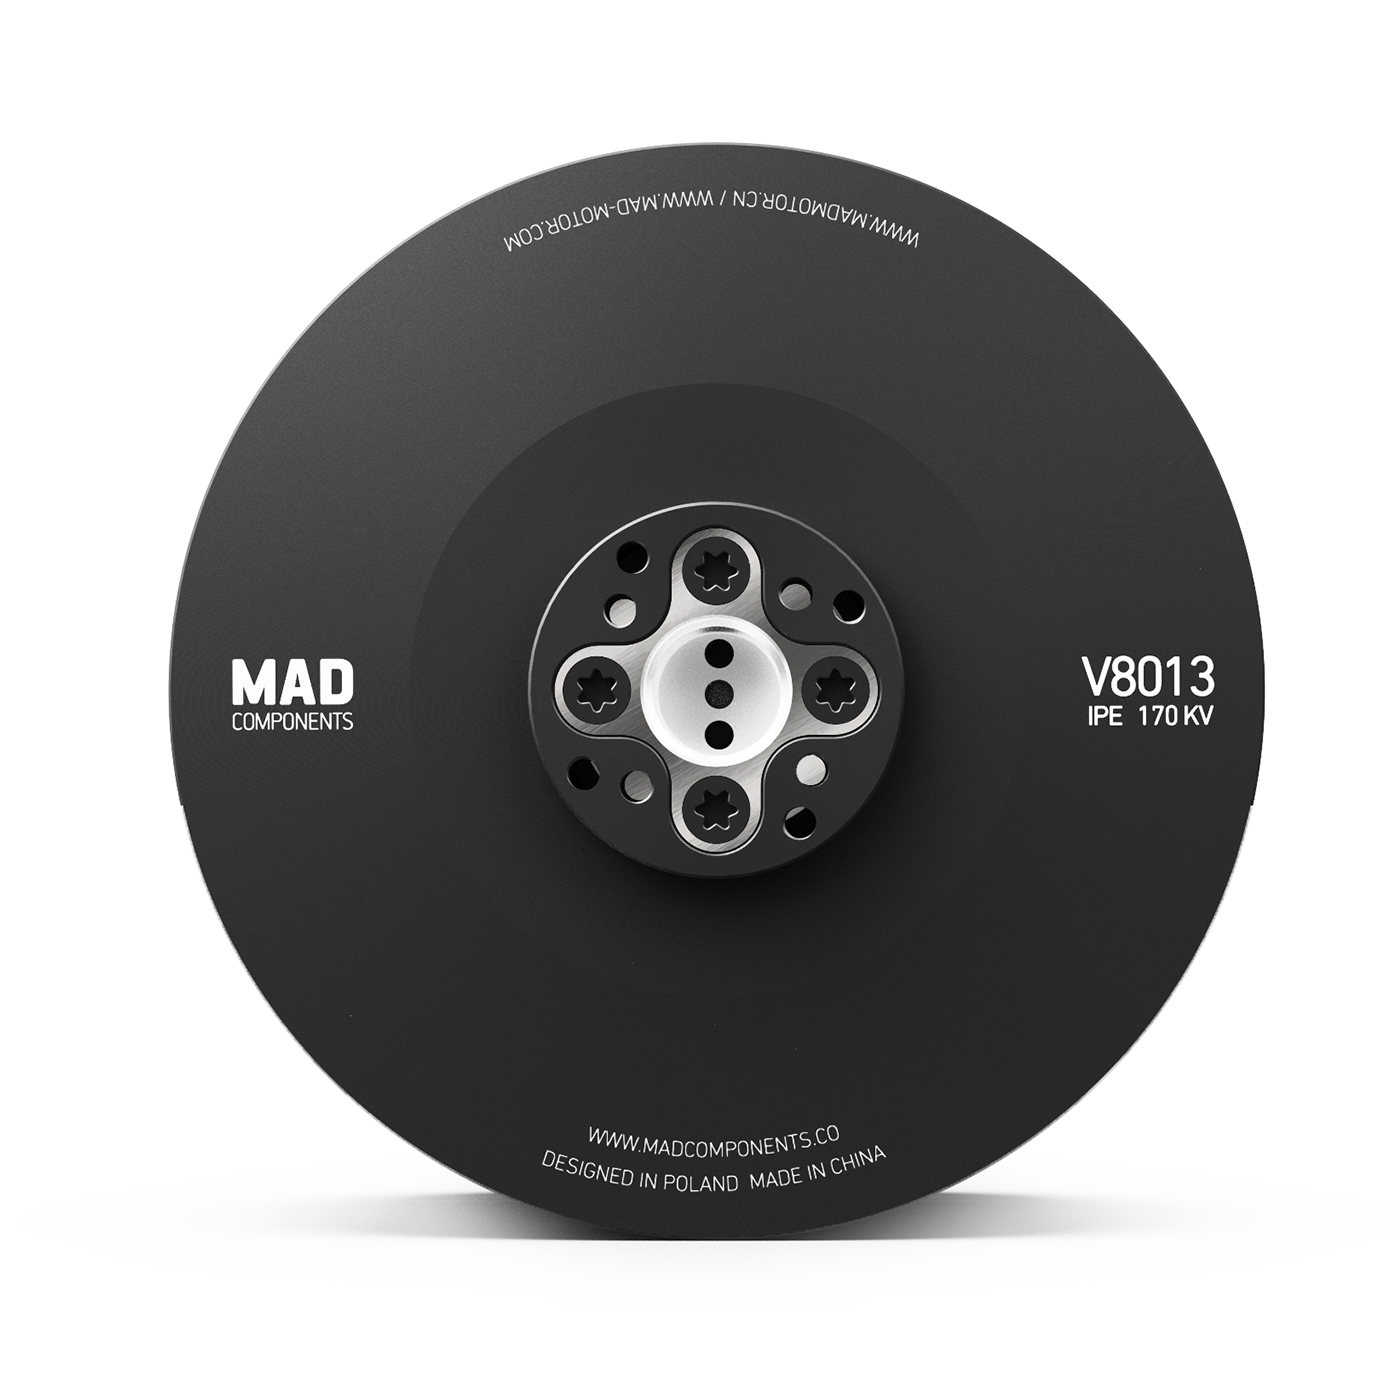 MAD V8013 IPE brushless motor for the classical  and big aerial photography, exploration, Archaeology, Remote sensing surveying, Mapping VTOL UAV drone aircraft-6098